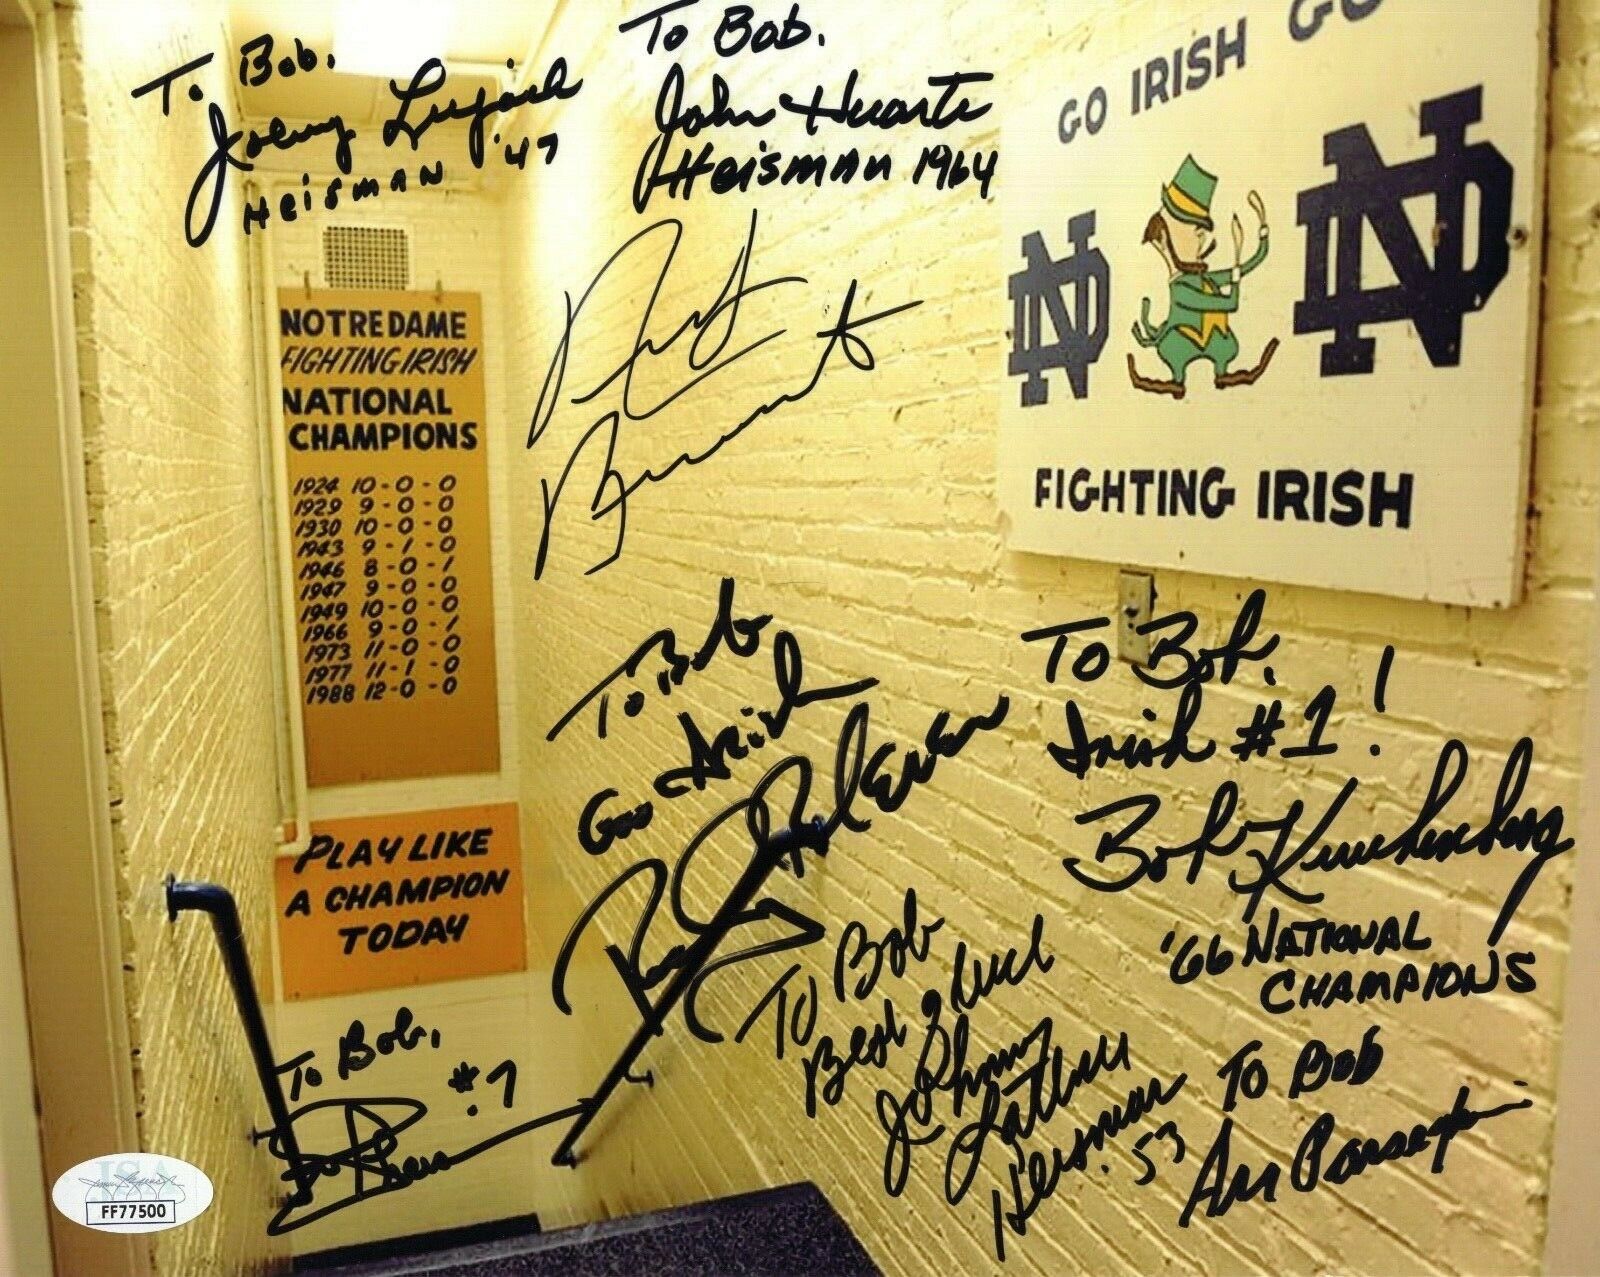 NOTRE DAME HAND SIGNED 8×10 COLOR PHOTO SIGNED BY 8 LEGENDS TO BOB JSA COLLECTIBLE MEMORABILIA